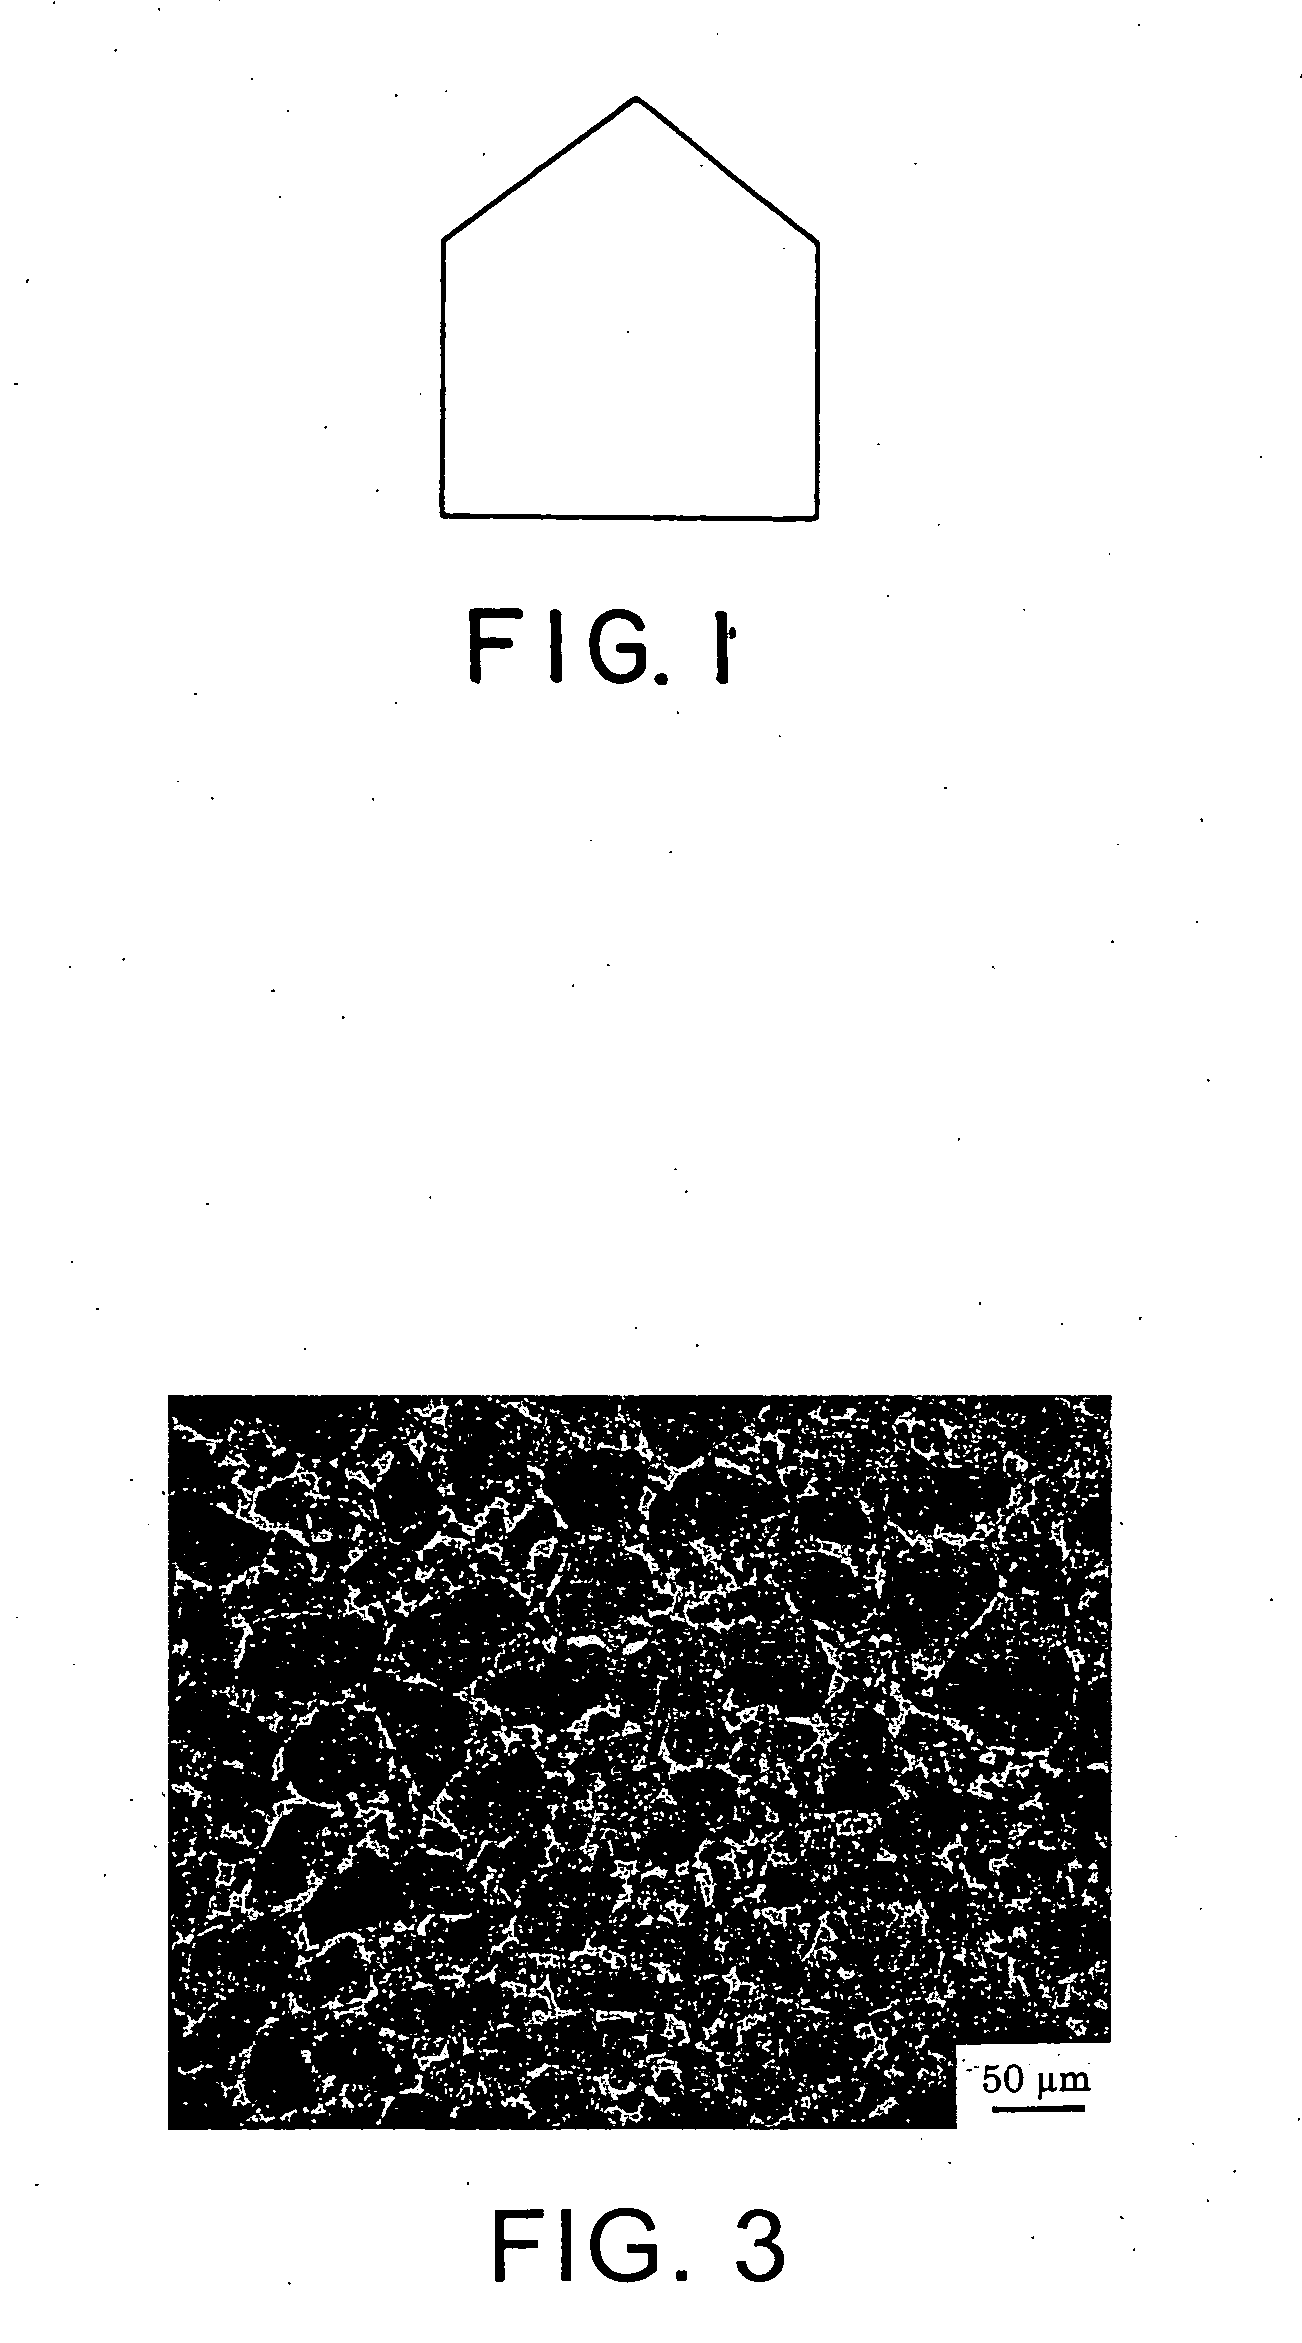 Boron carbide composite bodies, and methods for making same